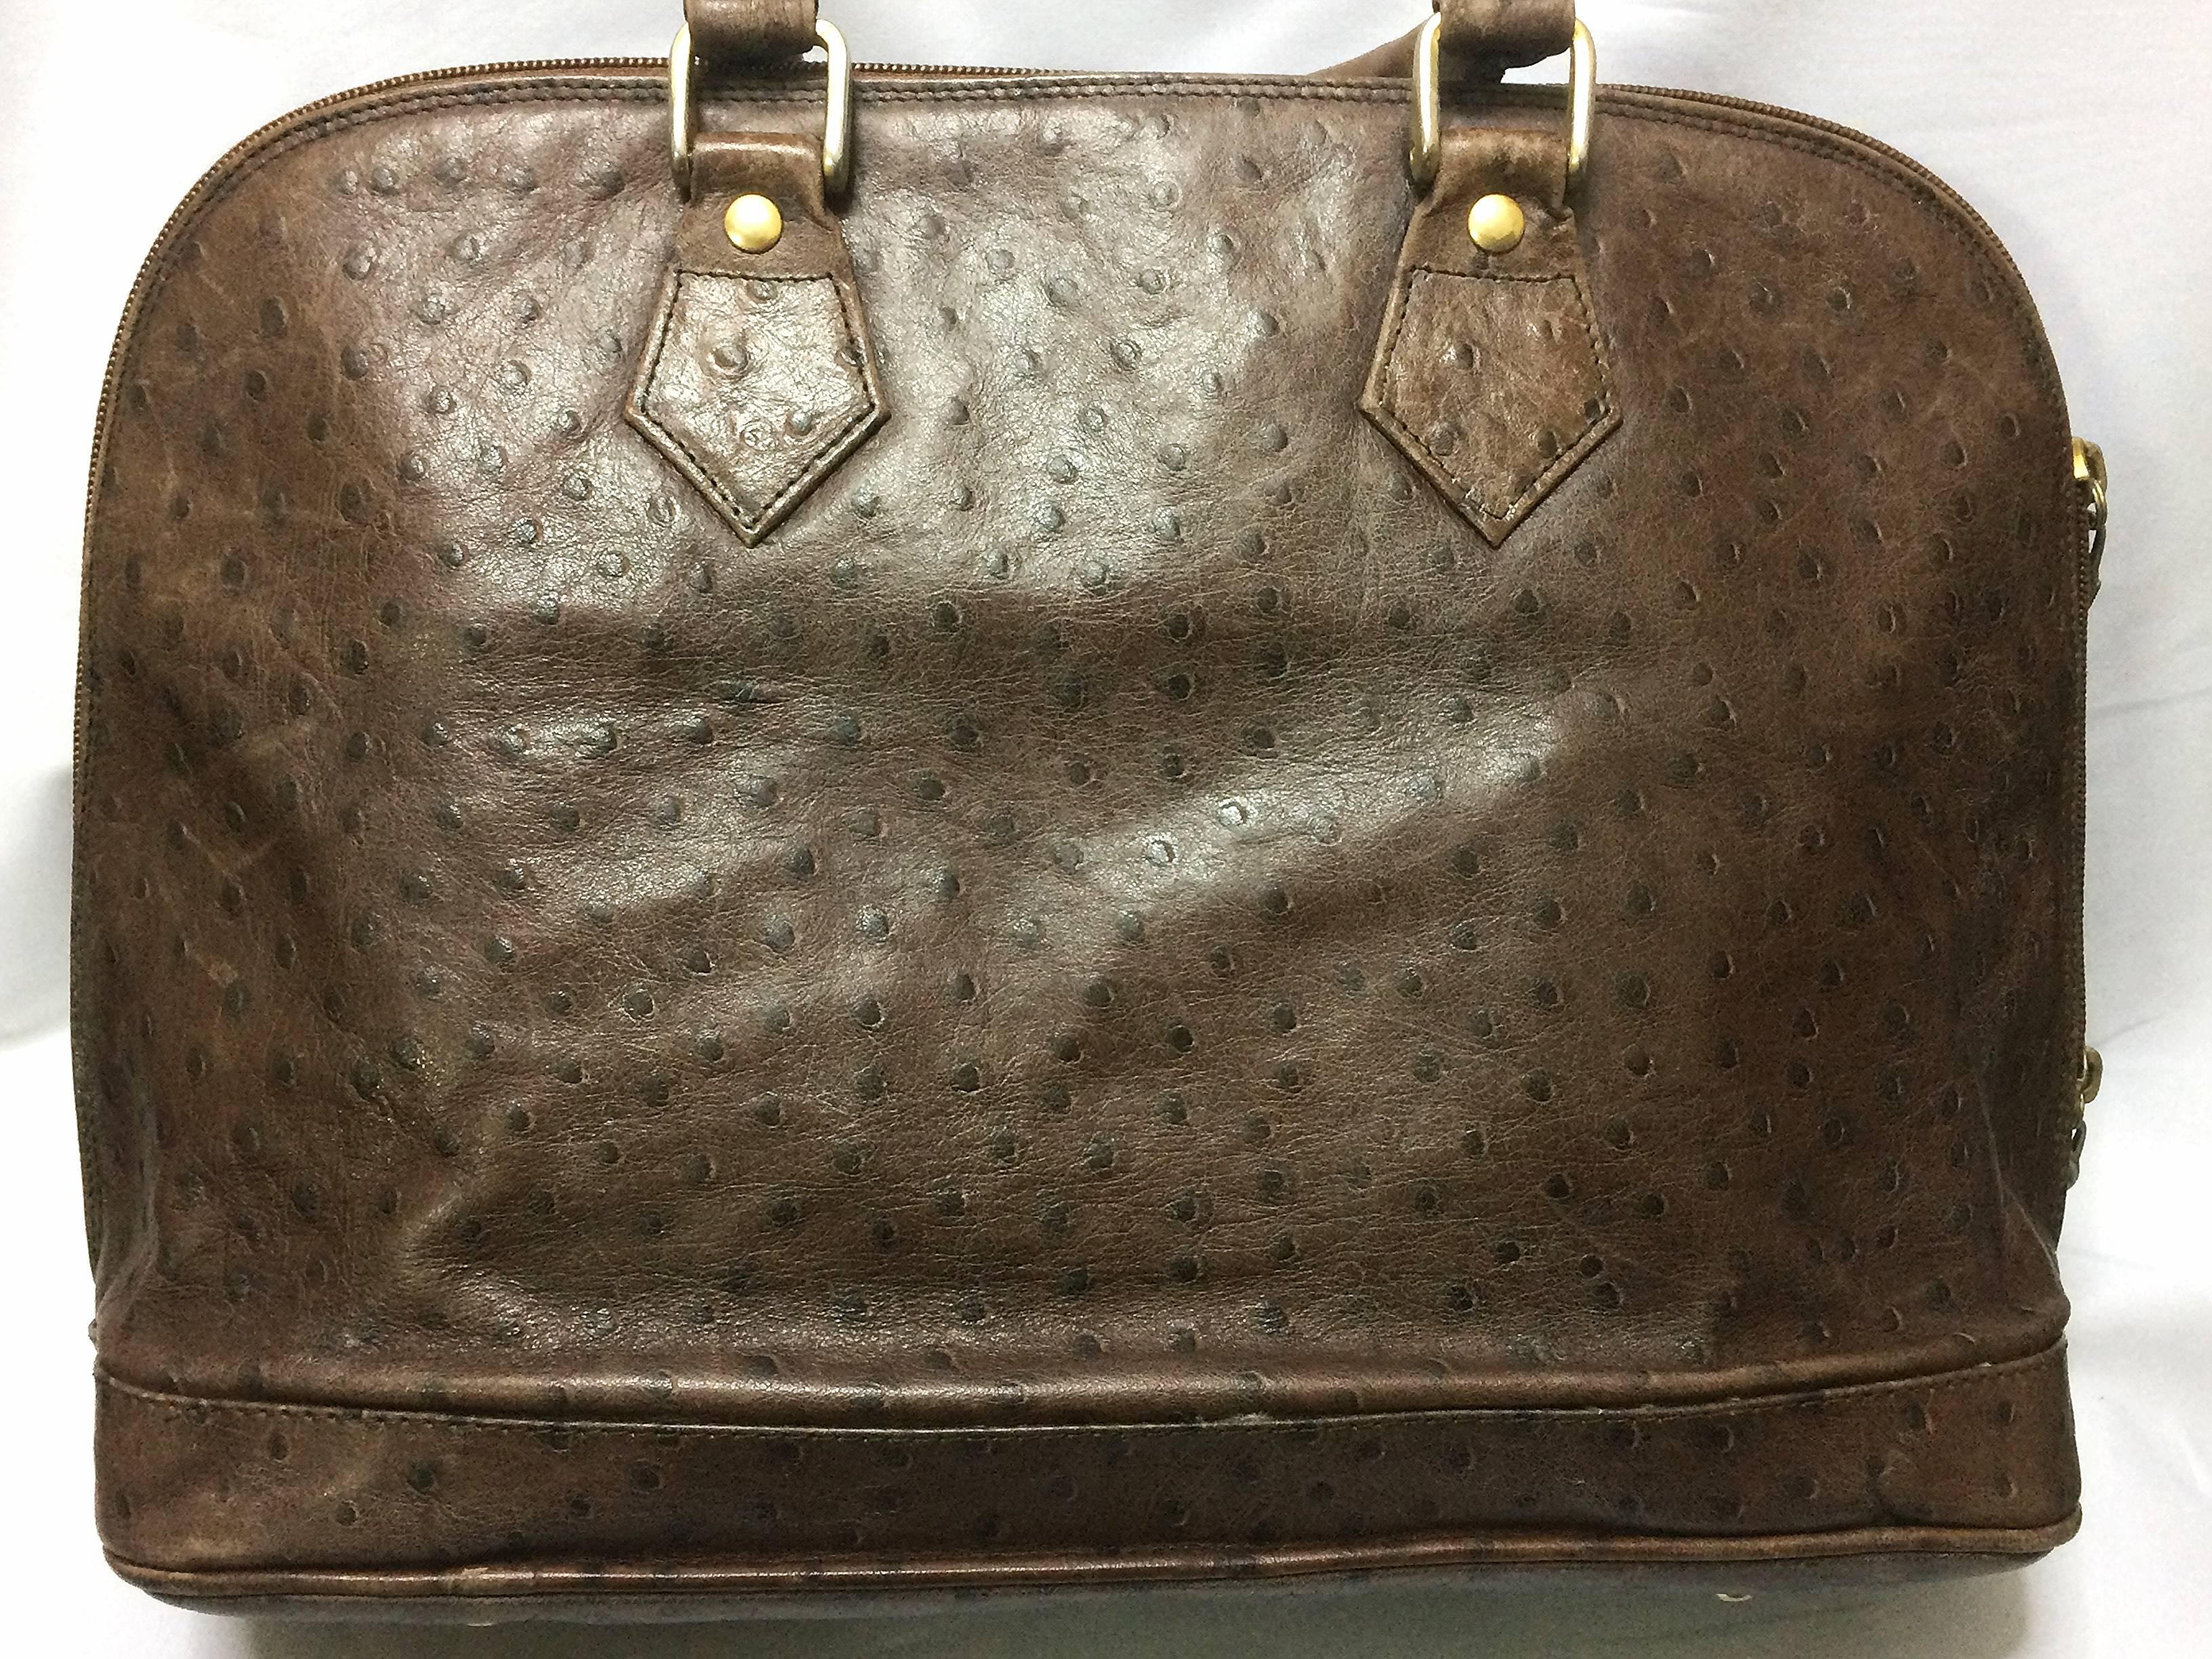 1980s Vintage Roberta di Camerino ostrich embossed brown leather bag in Alma style with gold tone R charms. Rare masterpiece.

Introducing a vintage Alma style ostrich-embossed leather bag from Roberta di Camerino approx from 80's.
Featuring